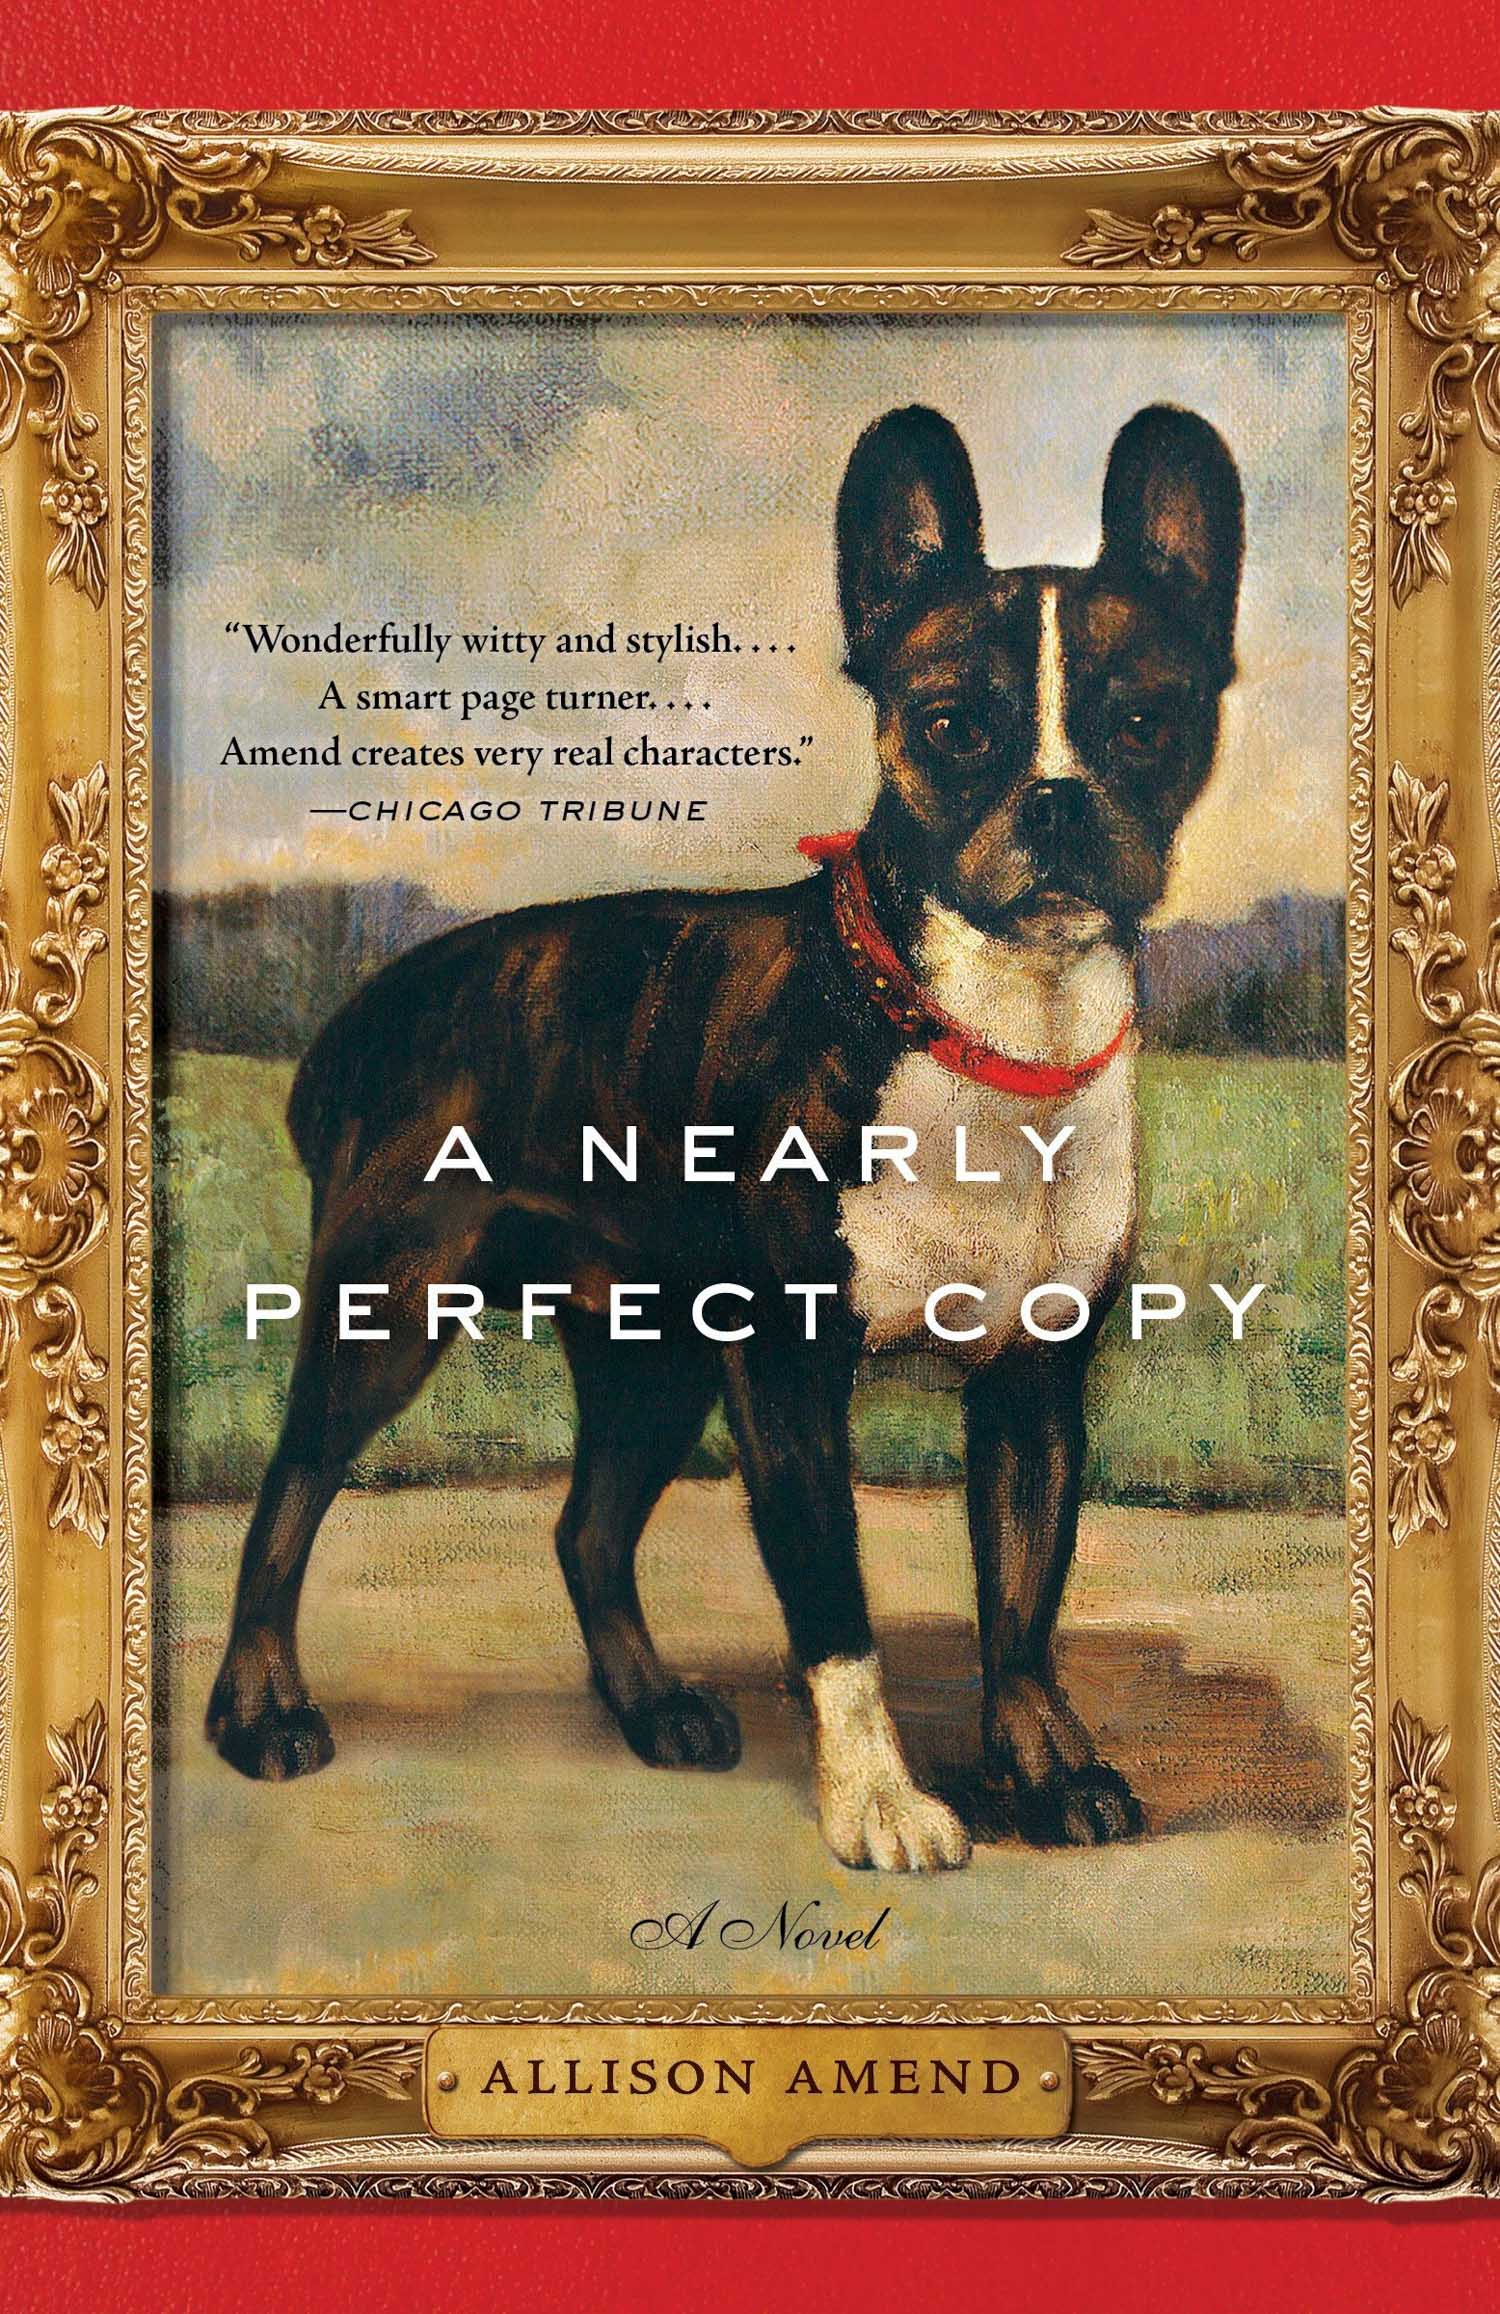 A Nearly Perfect Copy - A Novel by Allison Amend